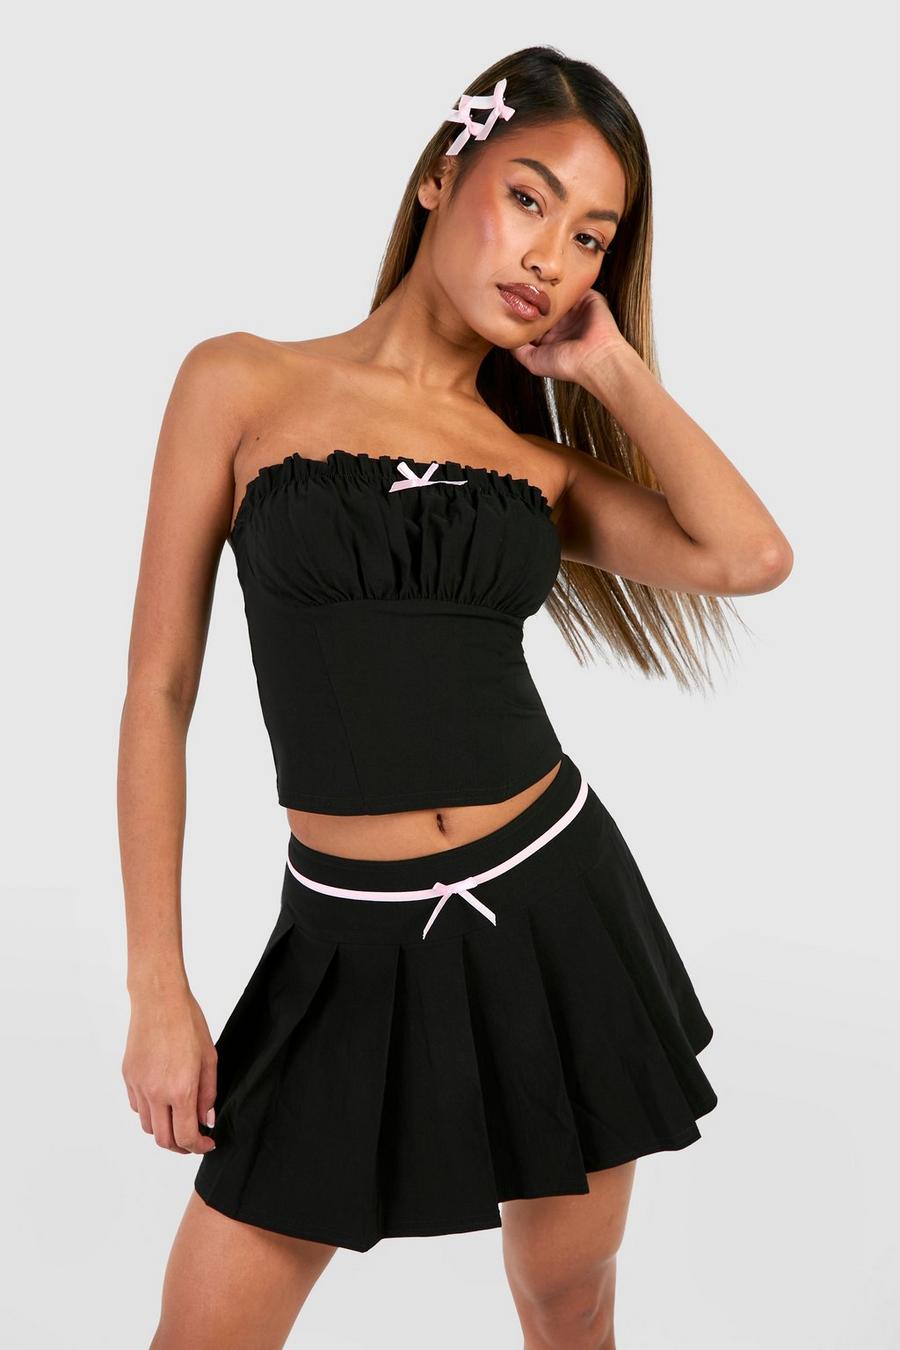 Silly Double Meaning Mini Skirts for Sale